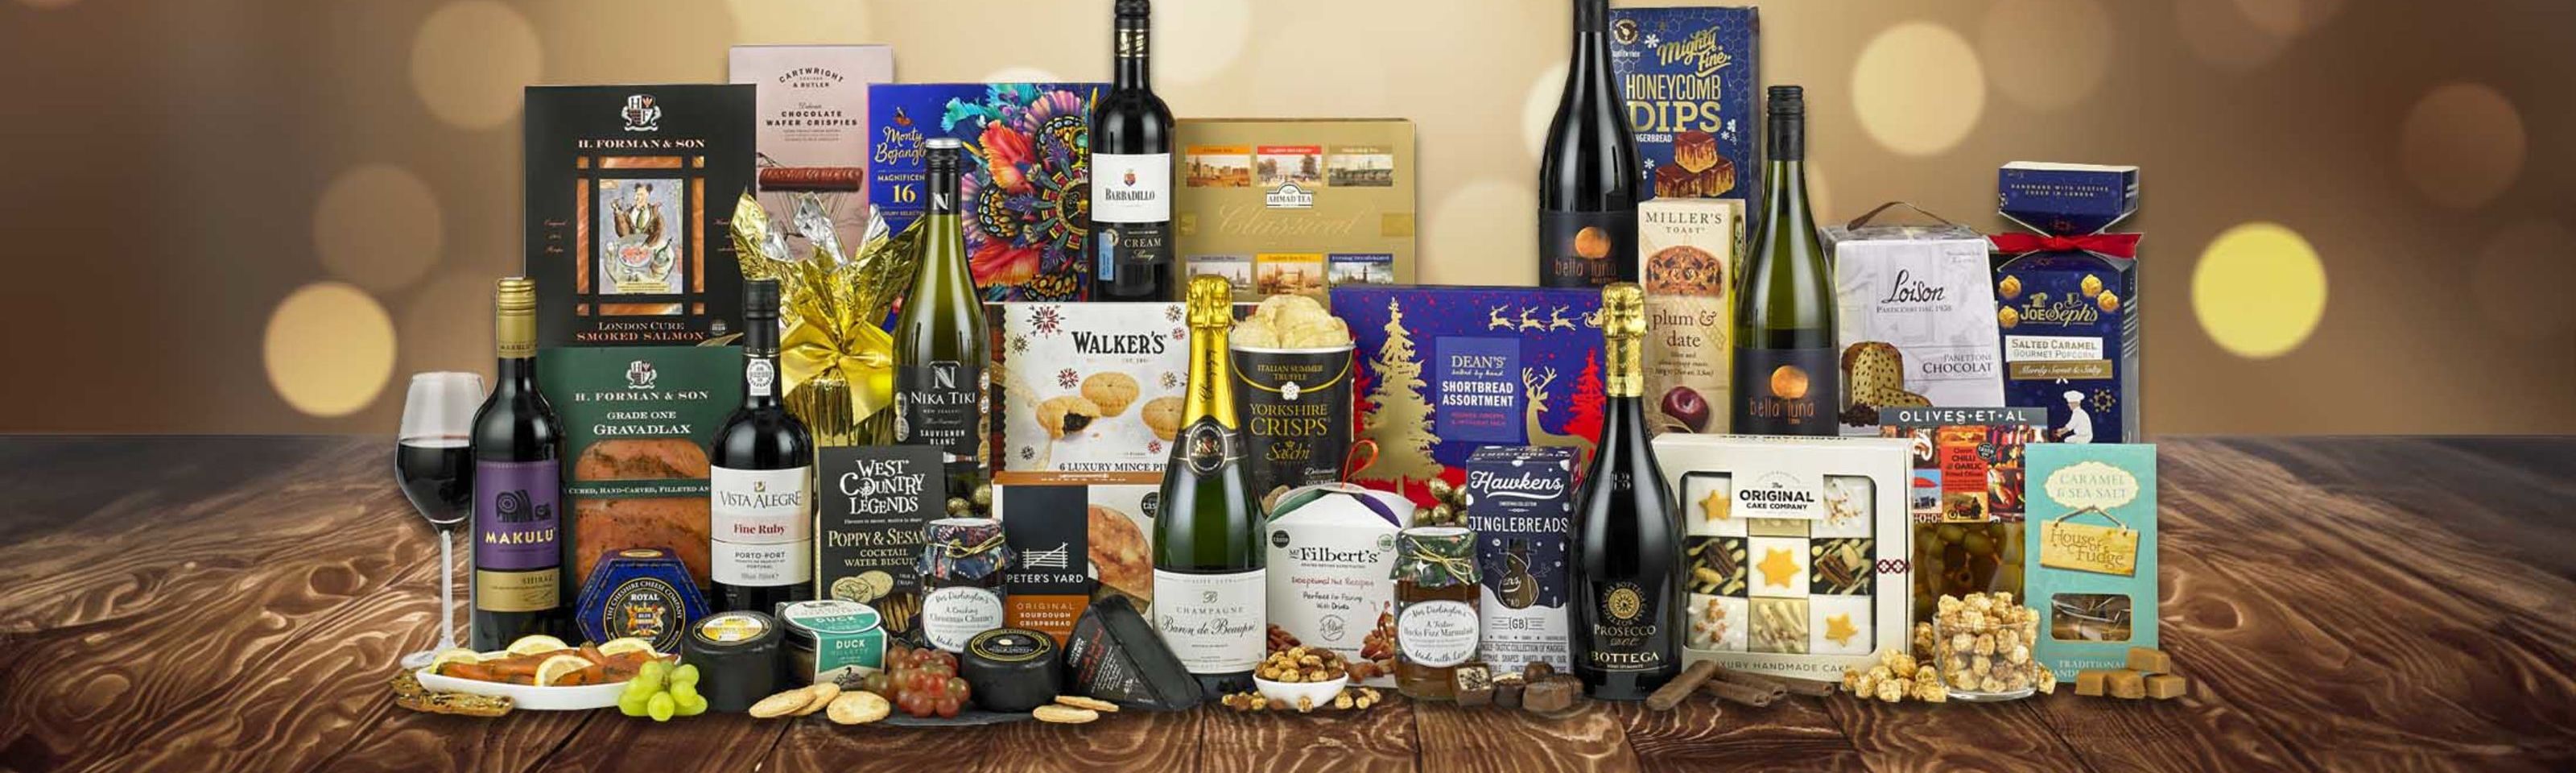 Over £100 hampers